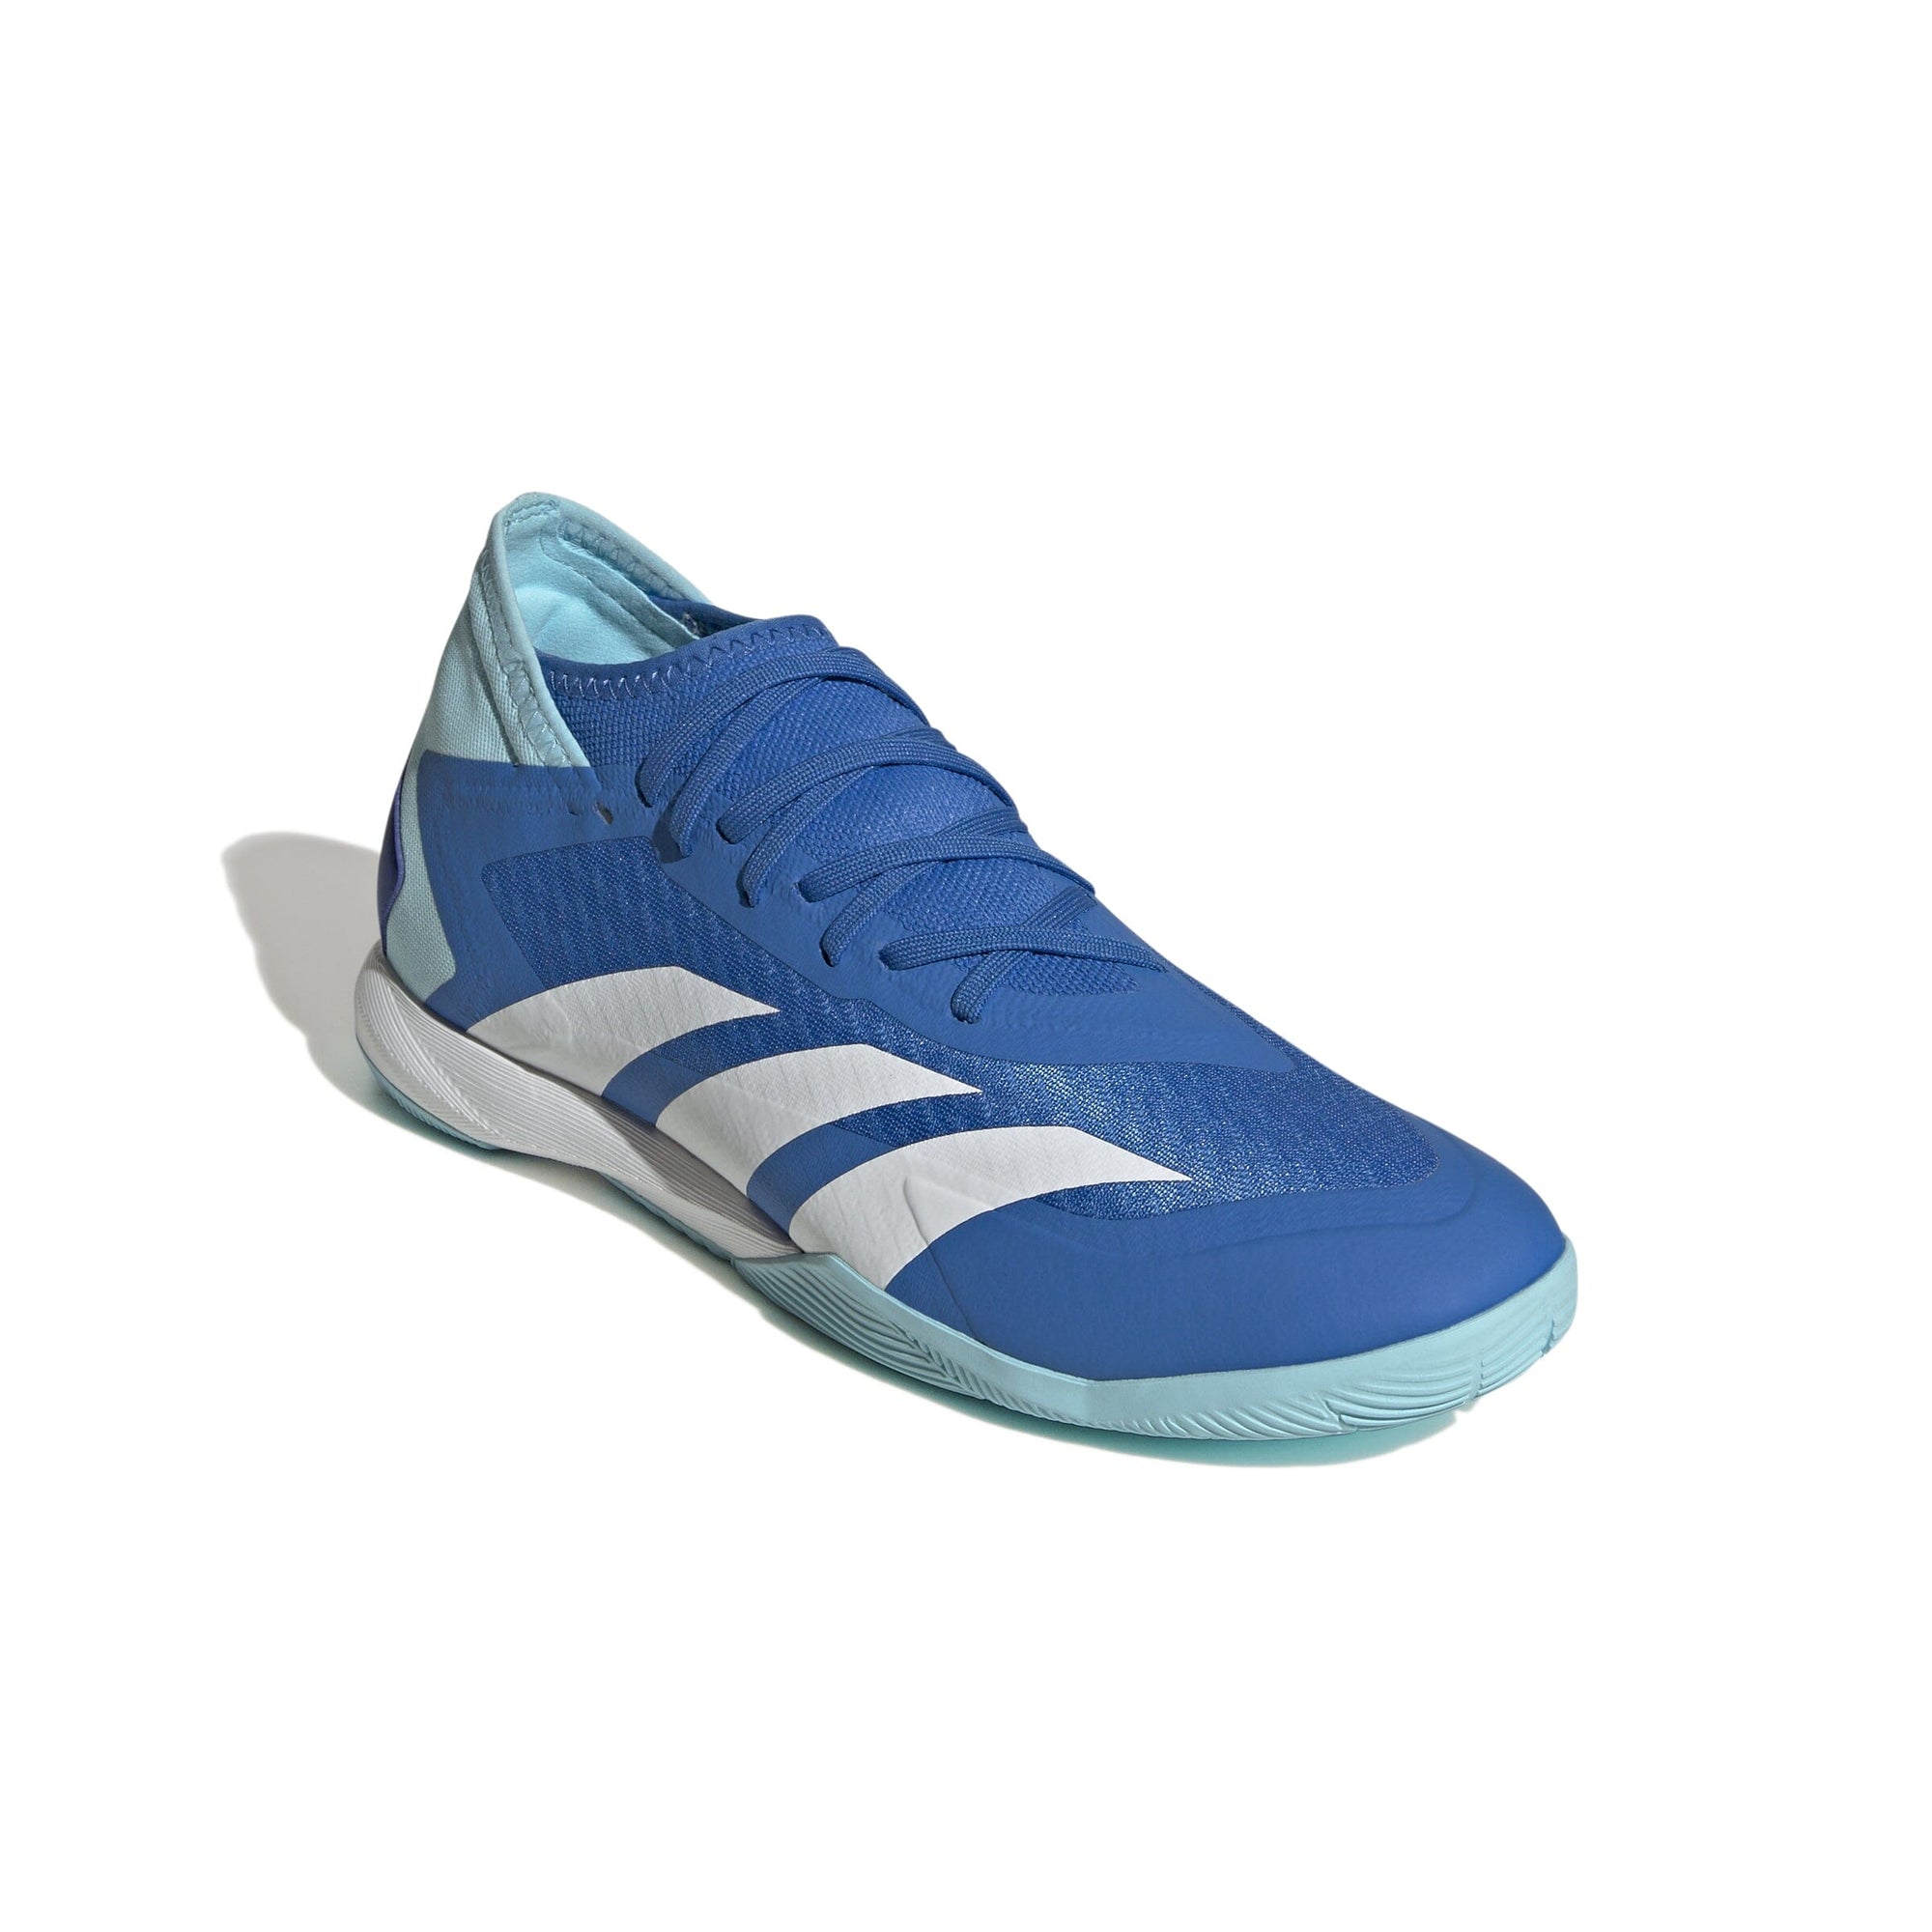 adidas Unisex Predator Accuracy.3 Indoor Shoes | GY9991 Soccer Cleats Adidas 